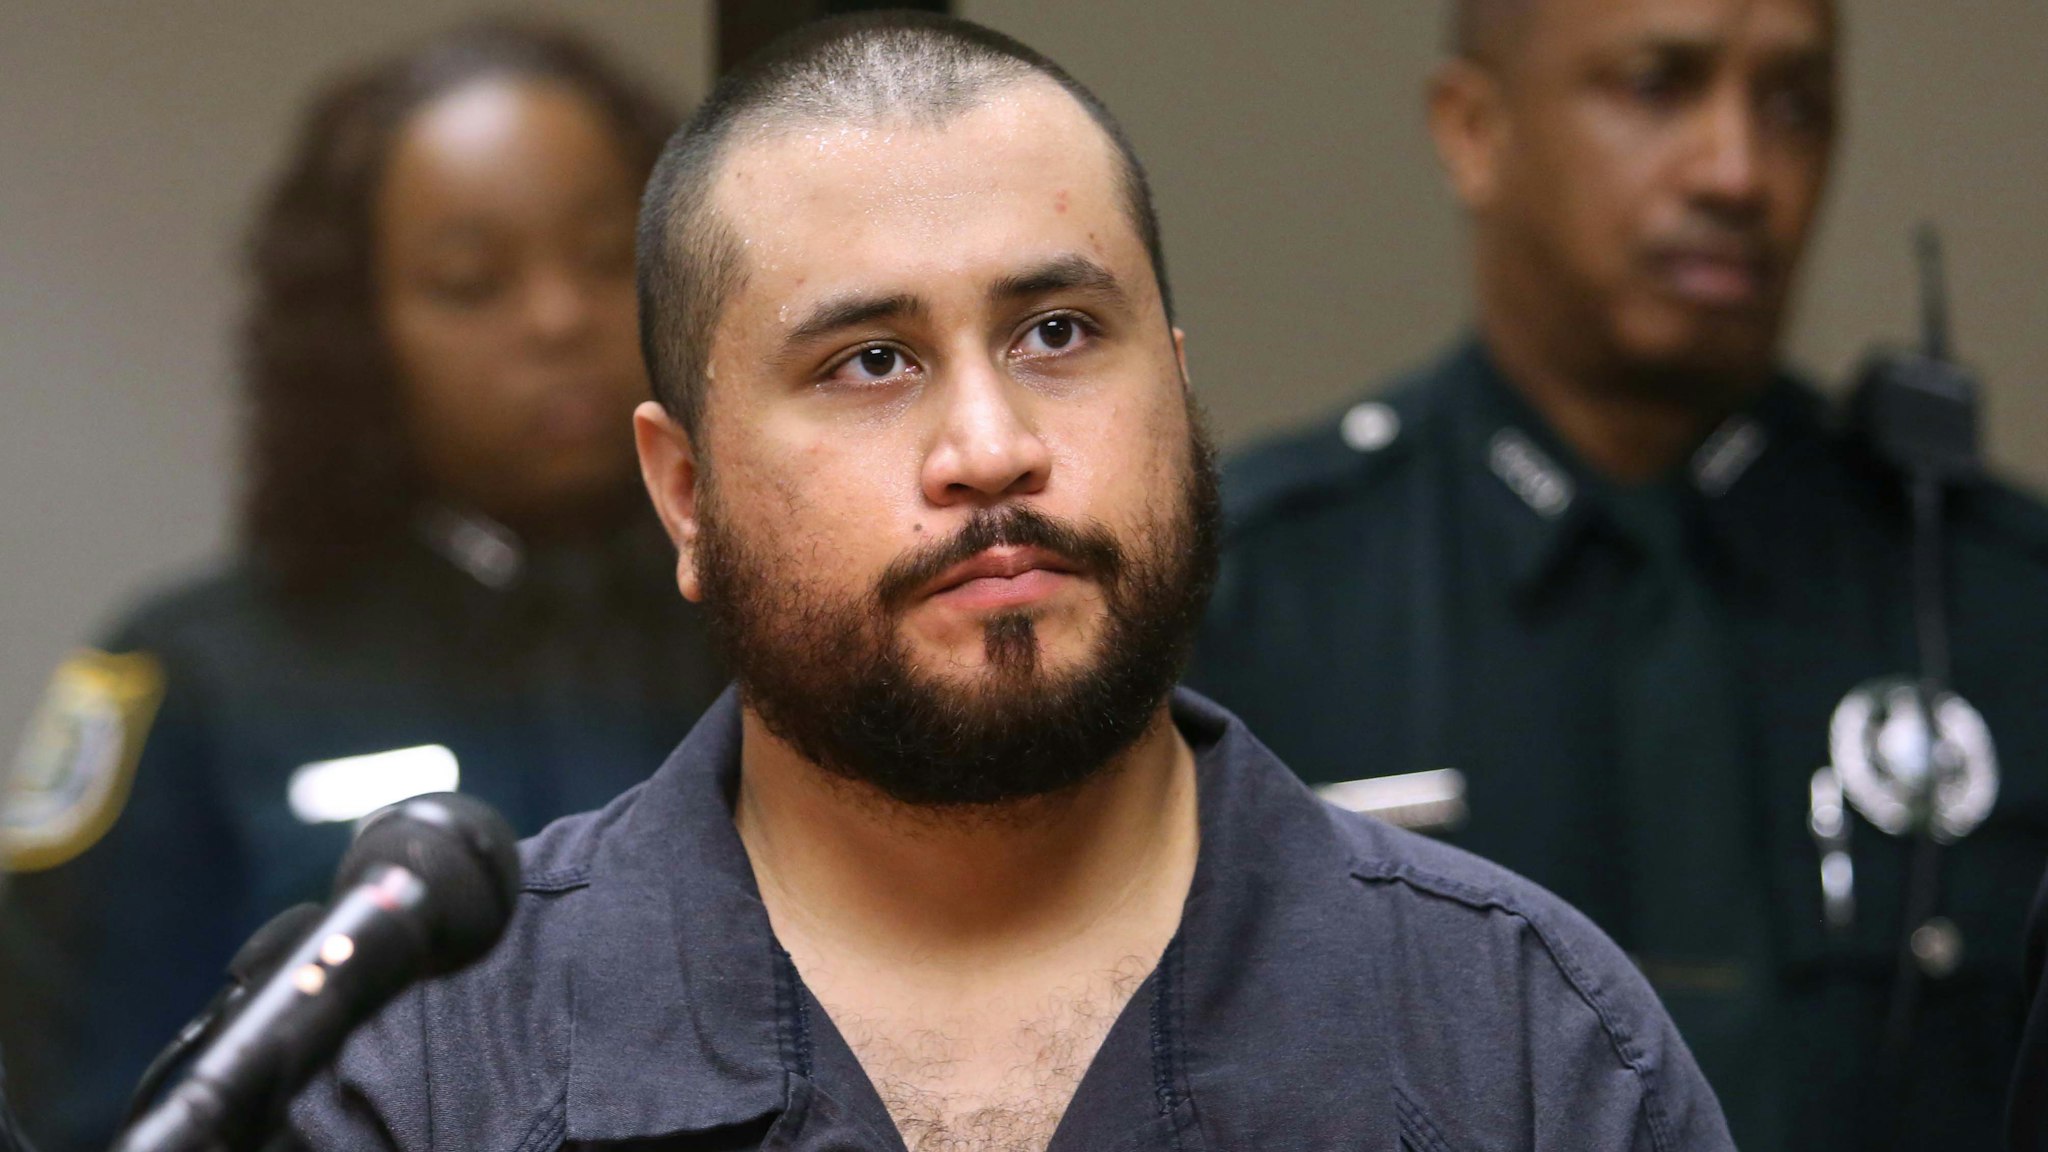 SANFORD, FL - NOVEMBER 19: George Zimmerman, the acquitted shooter in the death of Trayvon Martin, faces a Seminole circuit judge during a first-appearance hearing on charges including aggravated assault stemming from a fight with his girlfriend November 19, 2013 in Sanford, Florida. Zimmerman, 30, was arrested after police responded to a domestic disturbance call at a house. He was acquitted in July of all charges in the shooting death of unarmed, black teenager, Trayvon Martin.